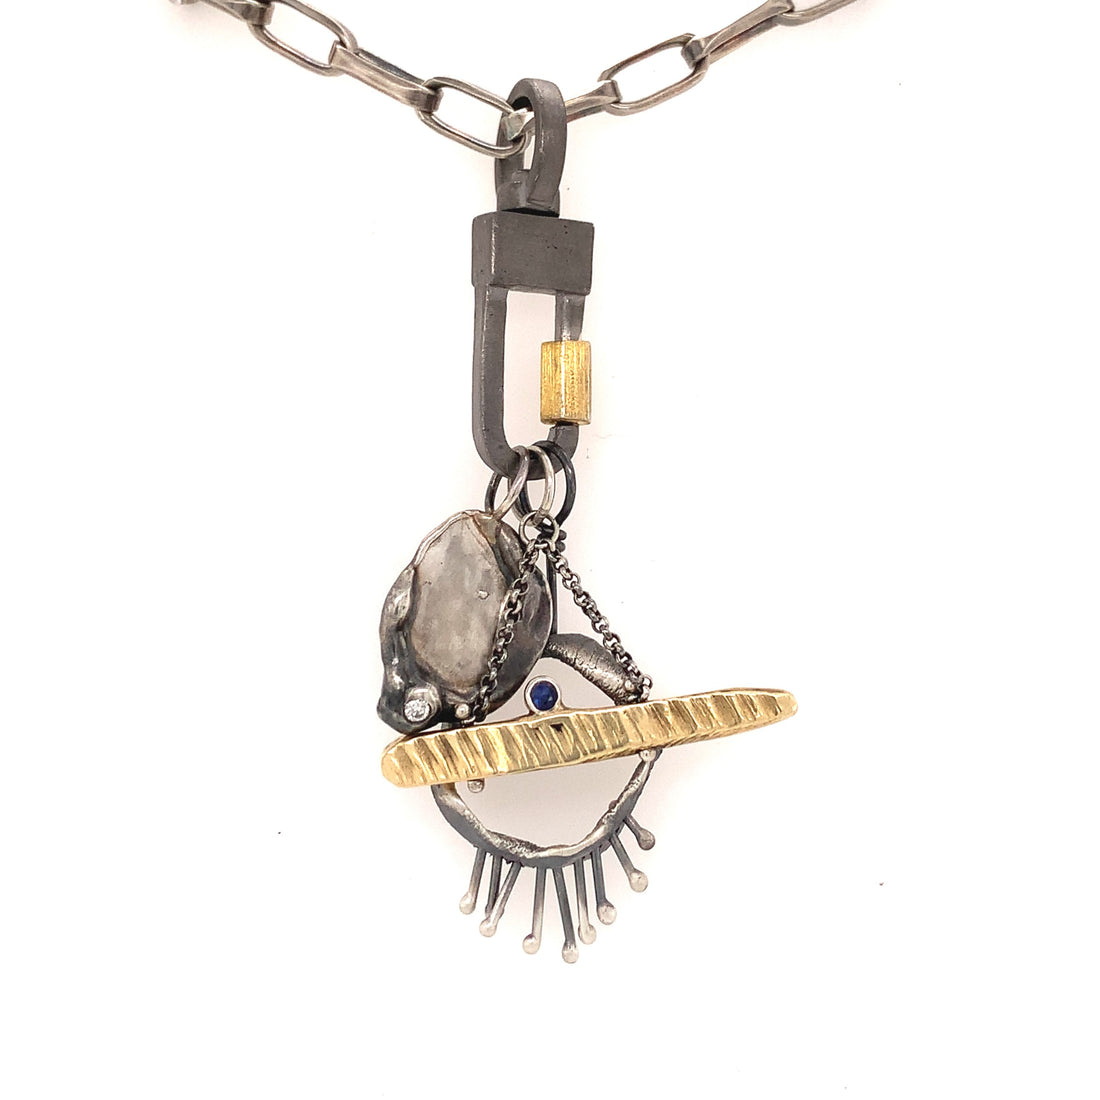 The Lock Connector is made of solid sterling silver with a 18k gold-plated screw closure and is made to swivel so your Talisman Pendants will move with your body.